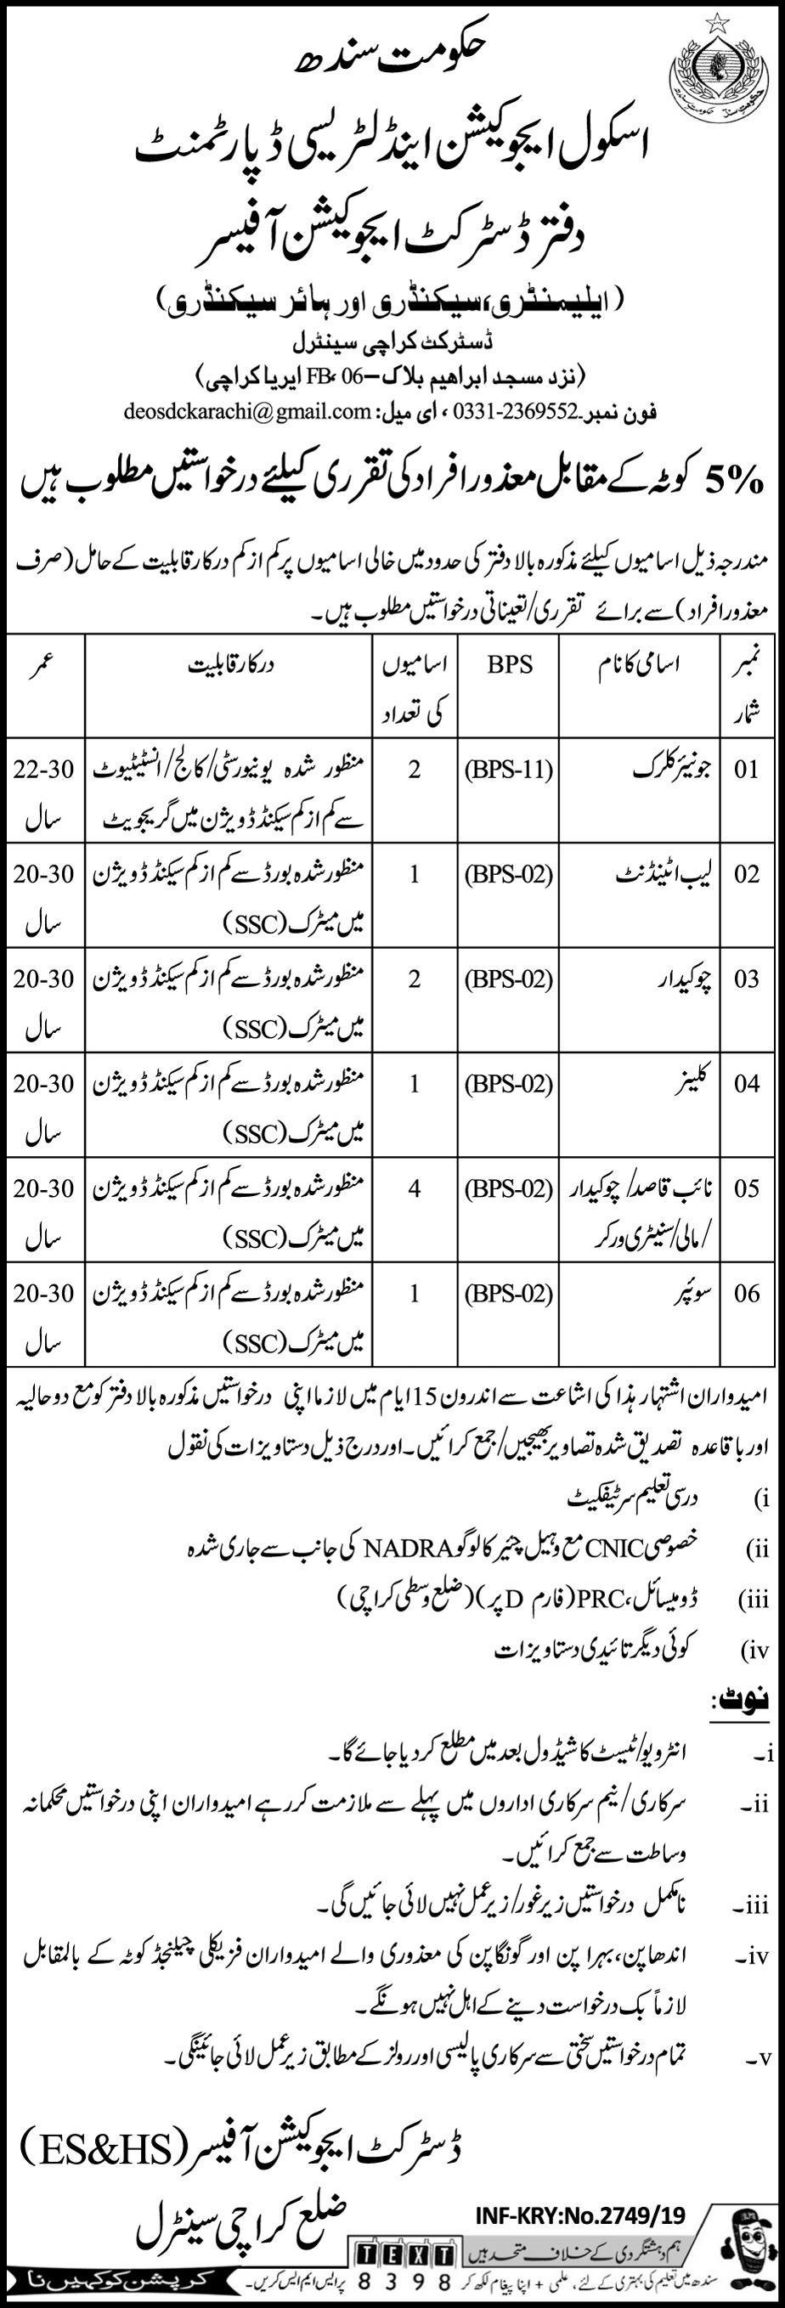 School Education & Literacy Department Sindh Jobs 2019 For 11+ Jr Clerks & Support Staff Posts